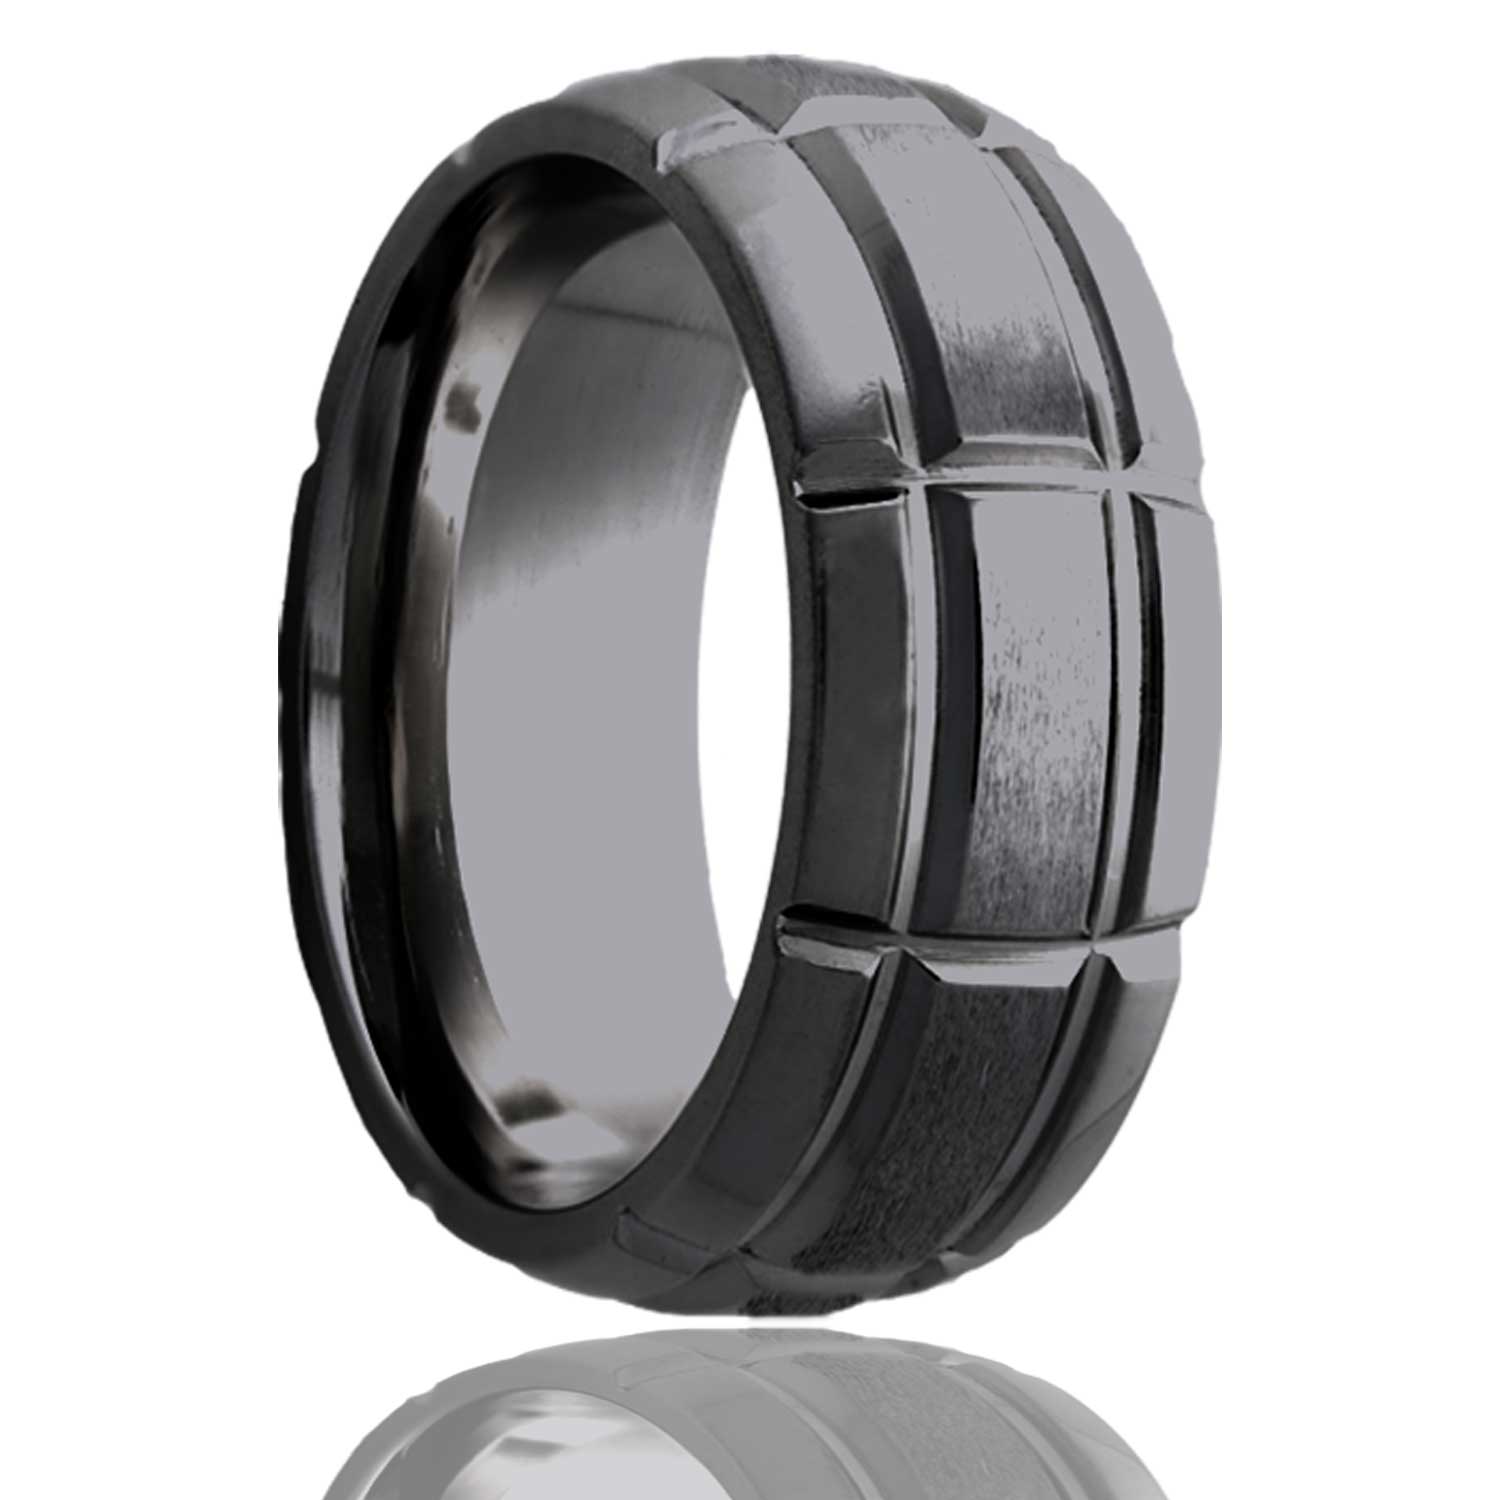 A intersecting groove pattern domed satin finish zirconium men's wedding band displayed on a neutral white background.